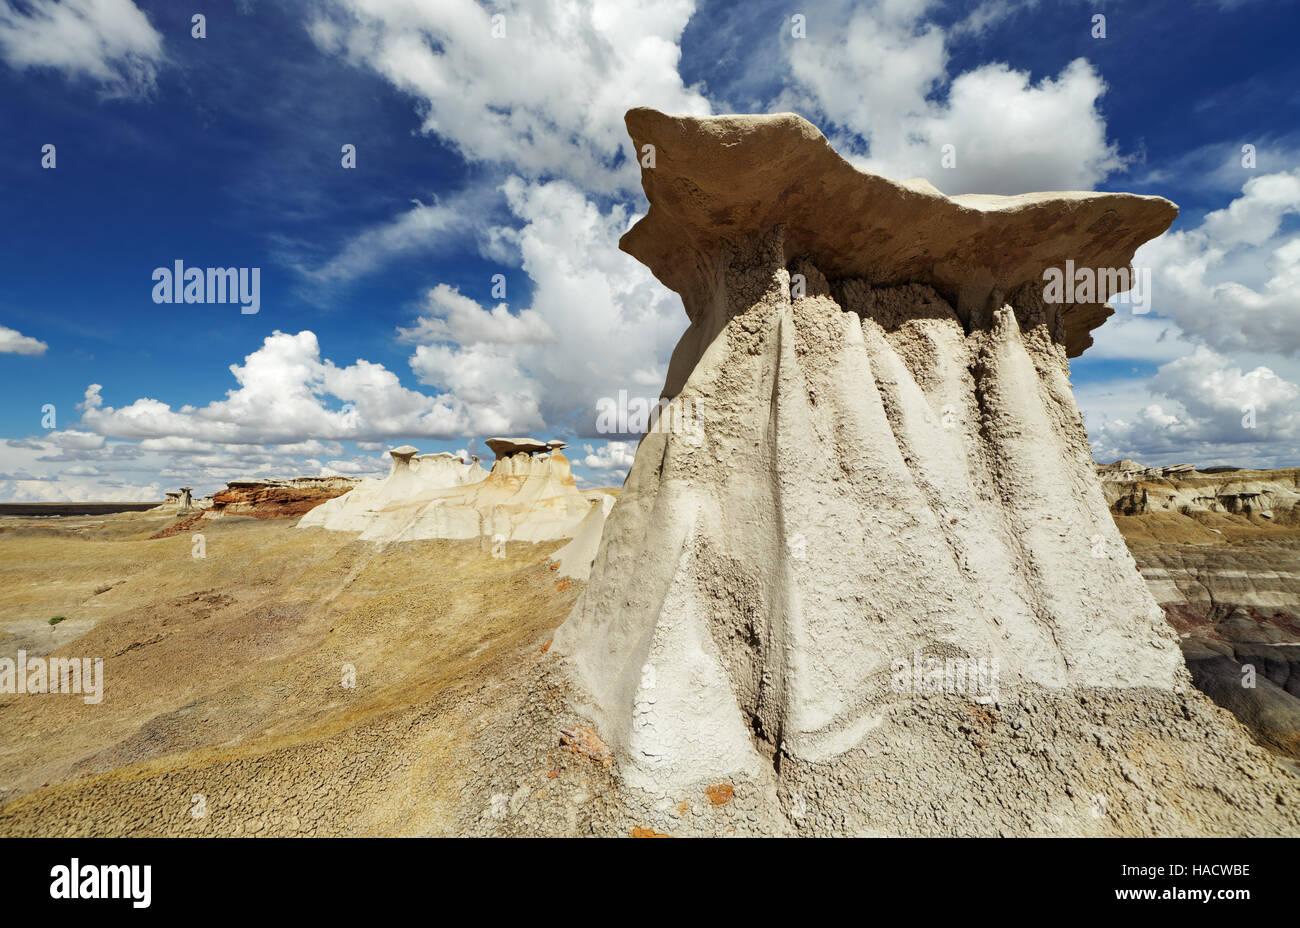 Rock formations in Bisti Badlands, New Mexico, USA Banque D'Images